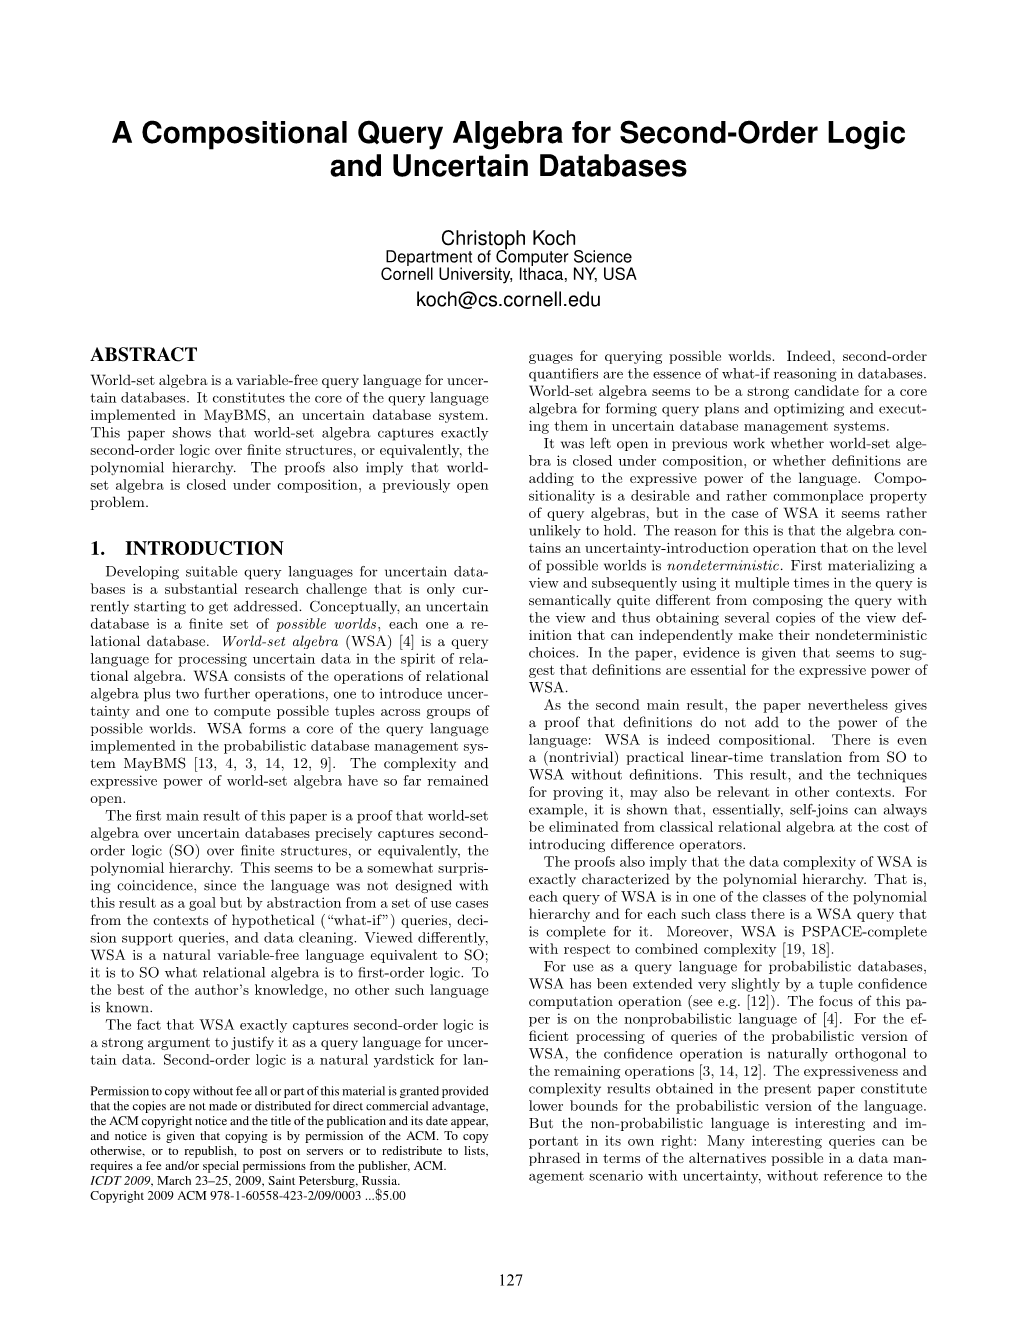 A Compositional Query Algebra for Second-Order Logic and Uncertain Databases